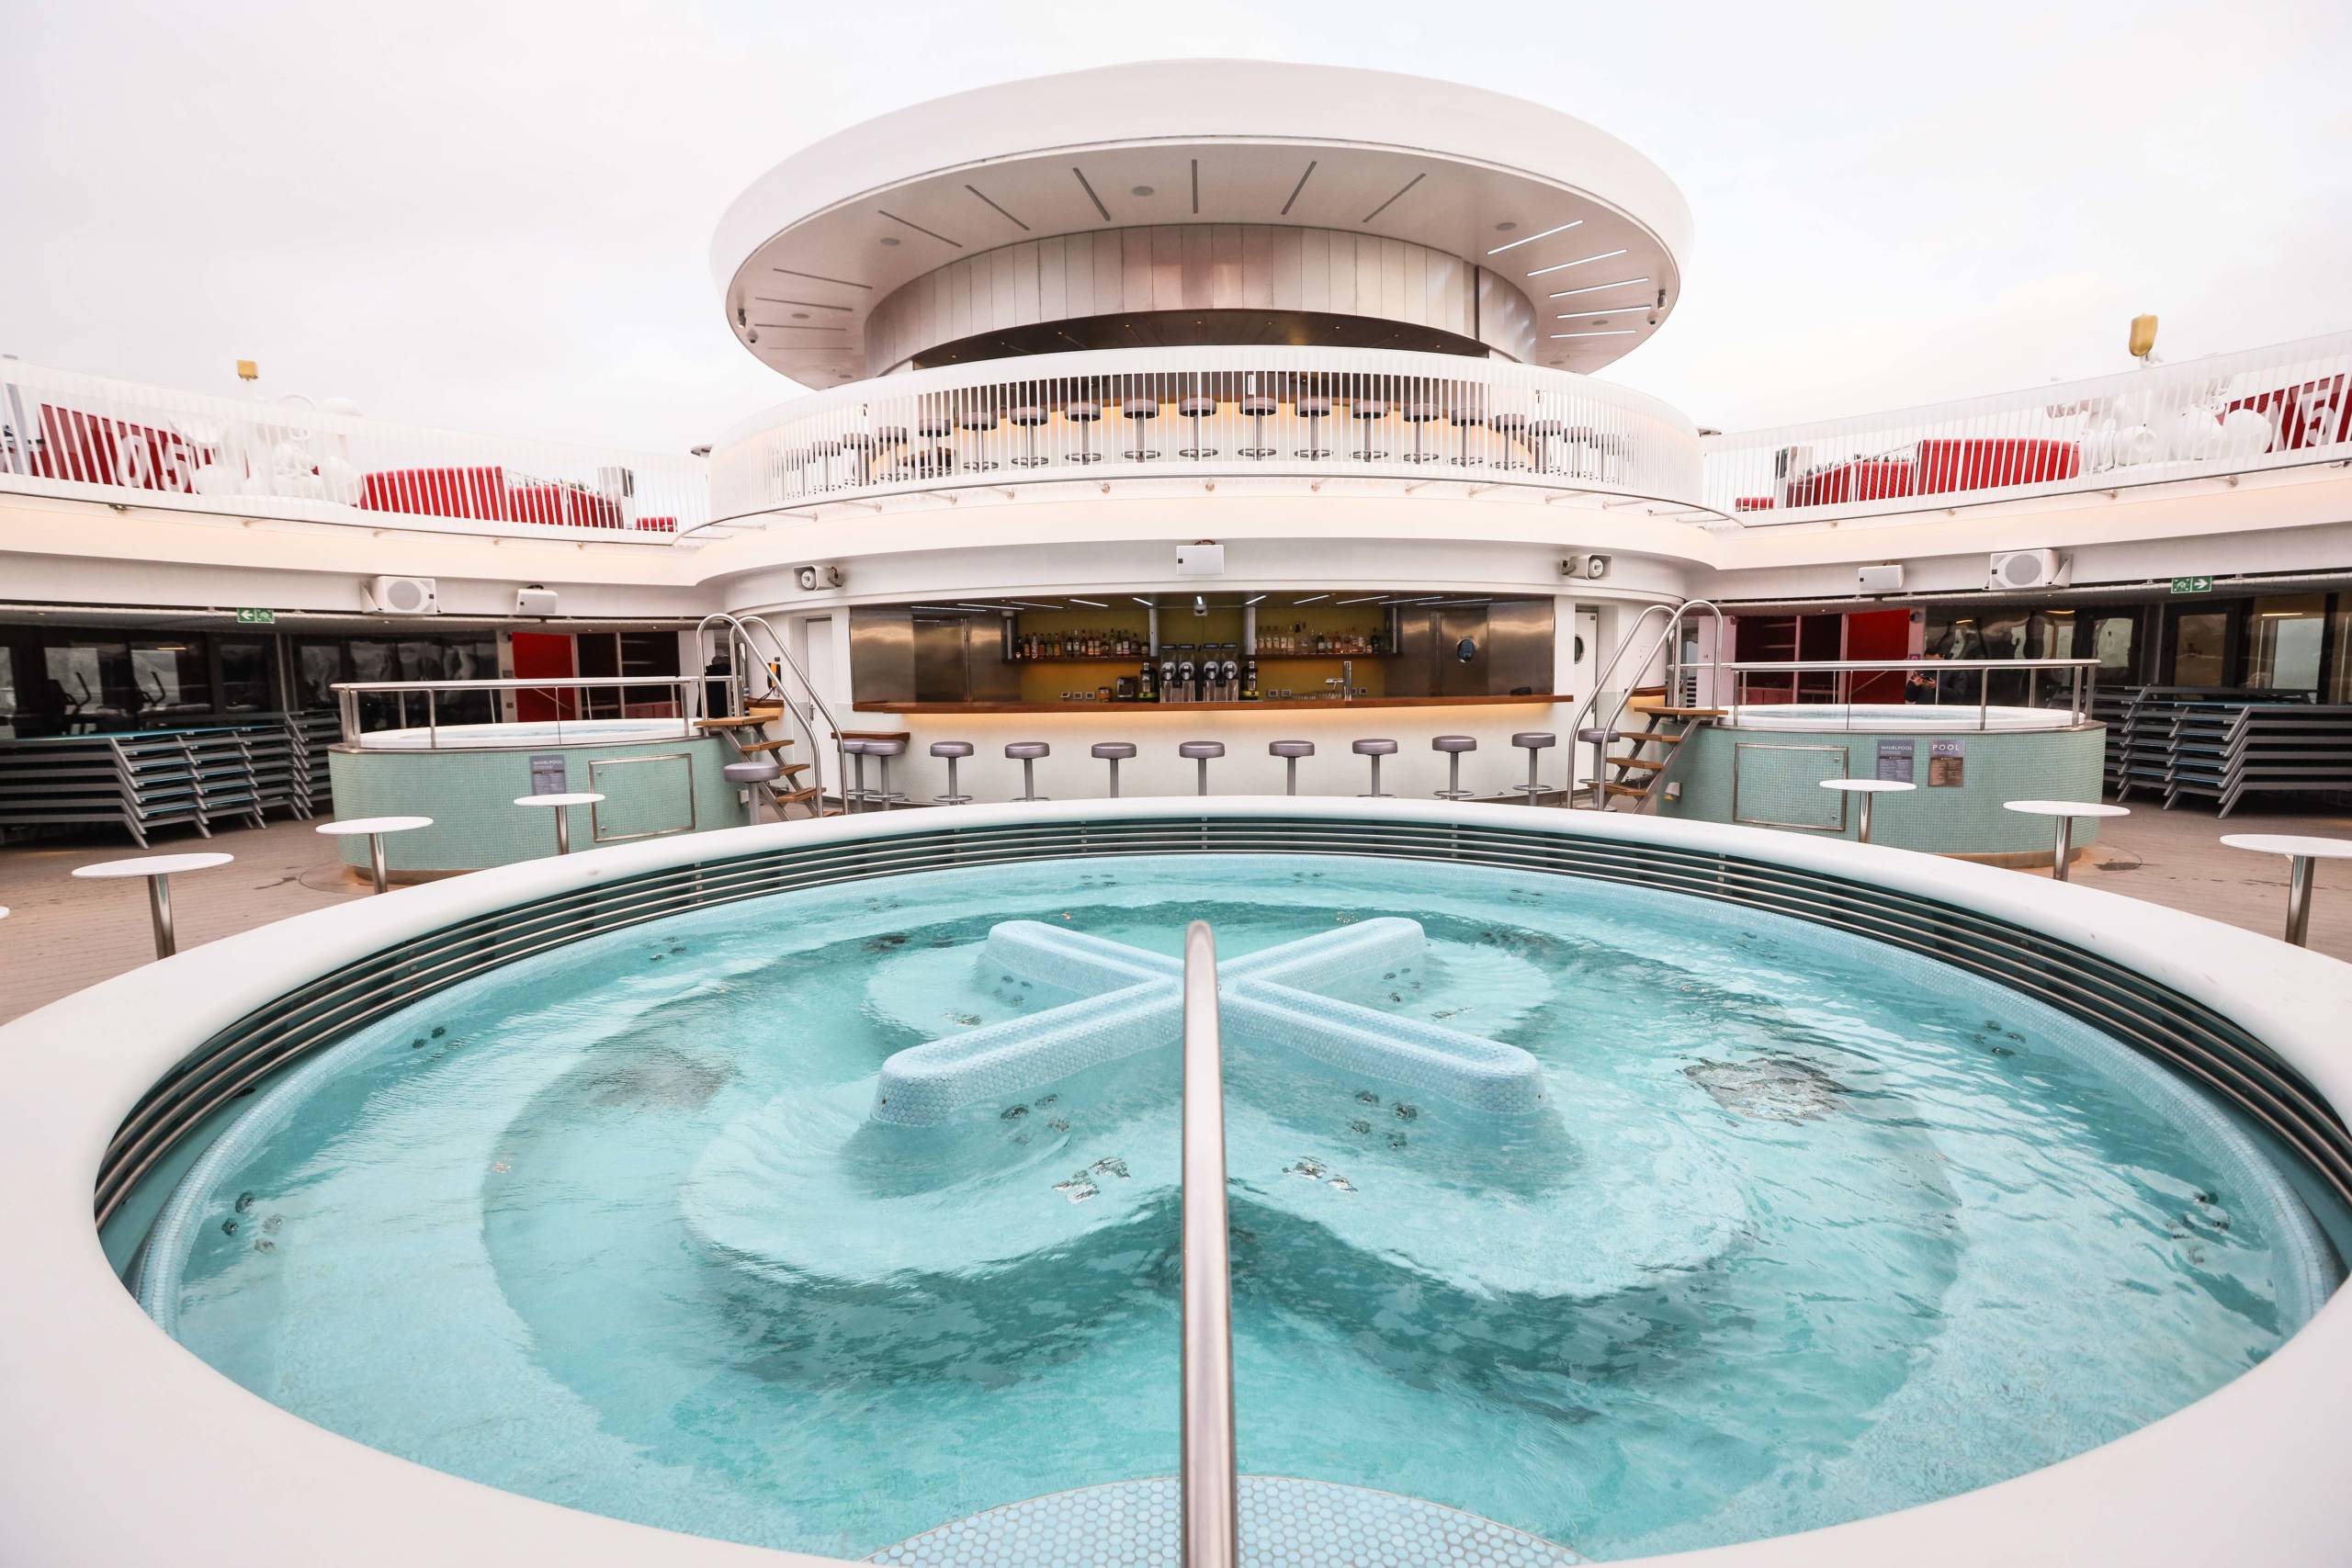 A cruise newbie's first impression of Virgin Voyages